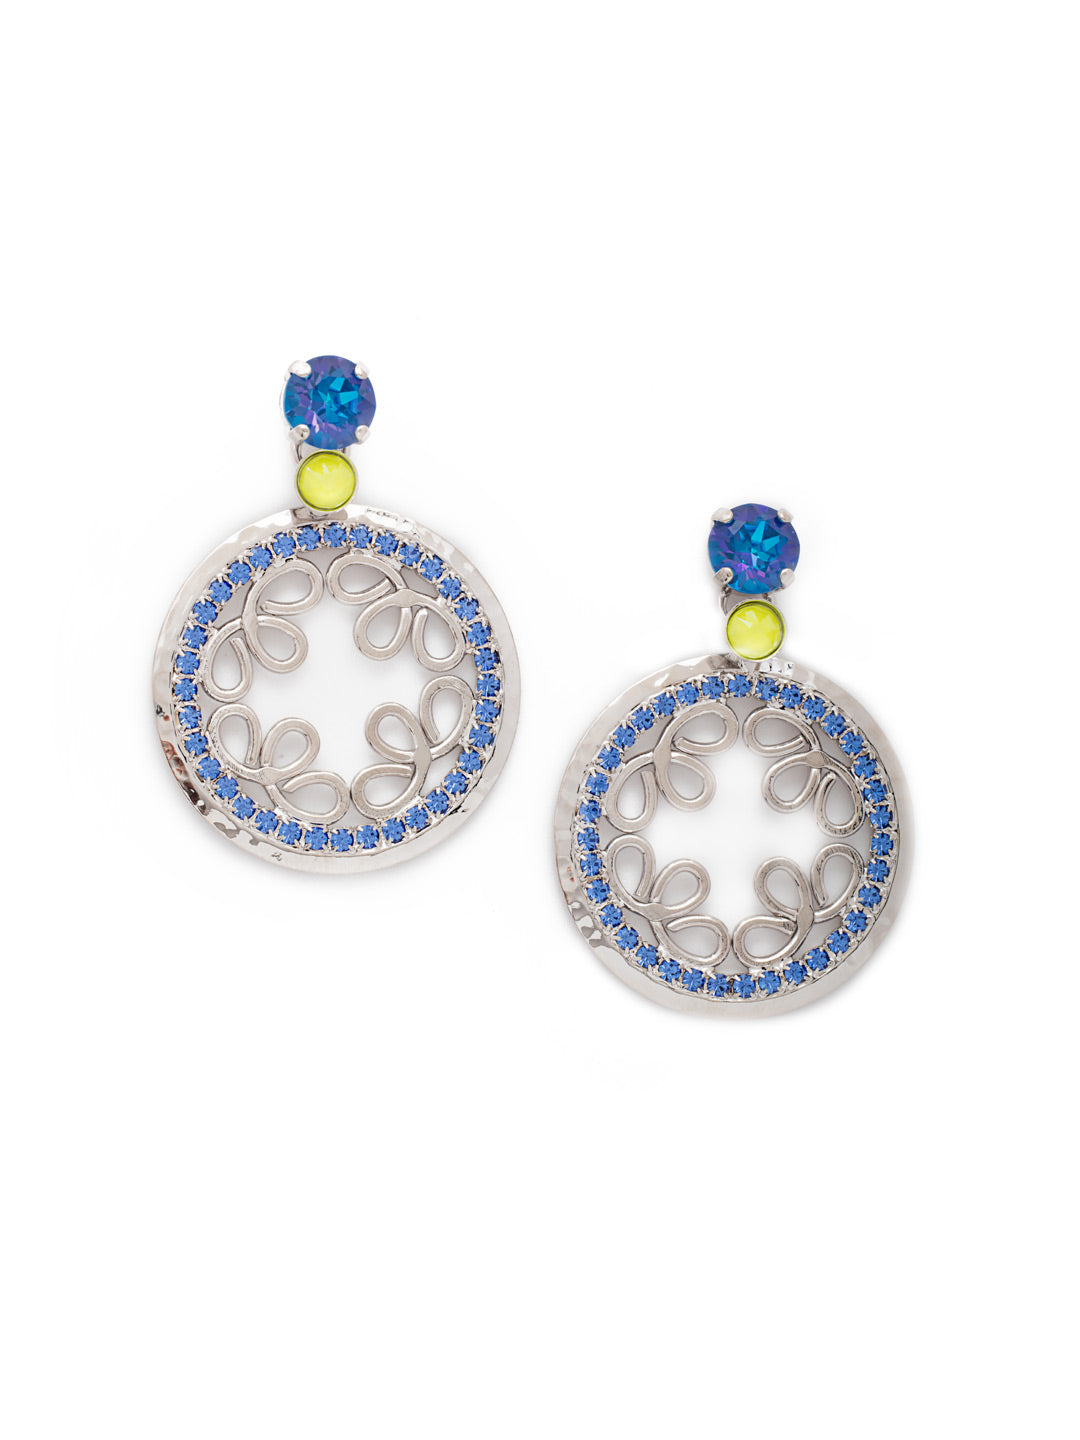 Tallulah Statement Earring - EES2PDBPY - <p>The Tallulah Dangle Earrings are showstoppers. A dominant cushion crystal has some serious competition from the hand-soldered metalwork rimmed in bright sparkling stones. From Sorrelli's Blue Poppy collection in our Palladium finish.</p>